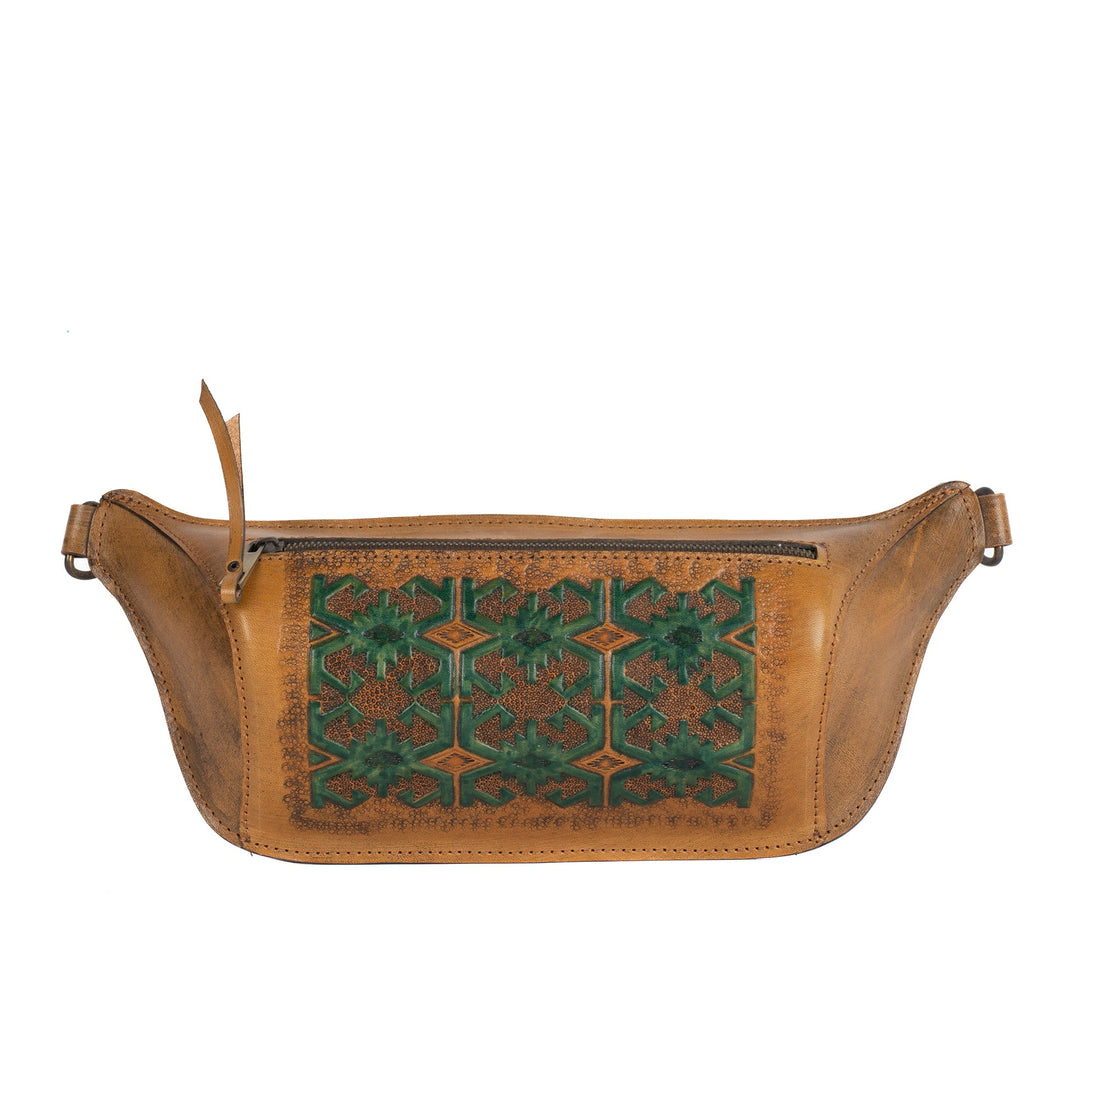 Hatti Tan Leather Carved & Crafted Waist Hand Bag - Handbags Zengoda Shop online from Artisan Brands